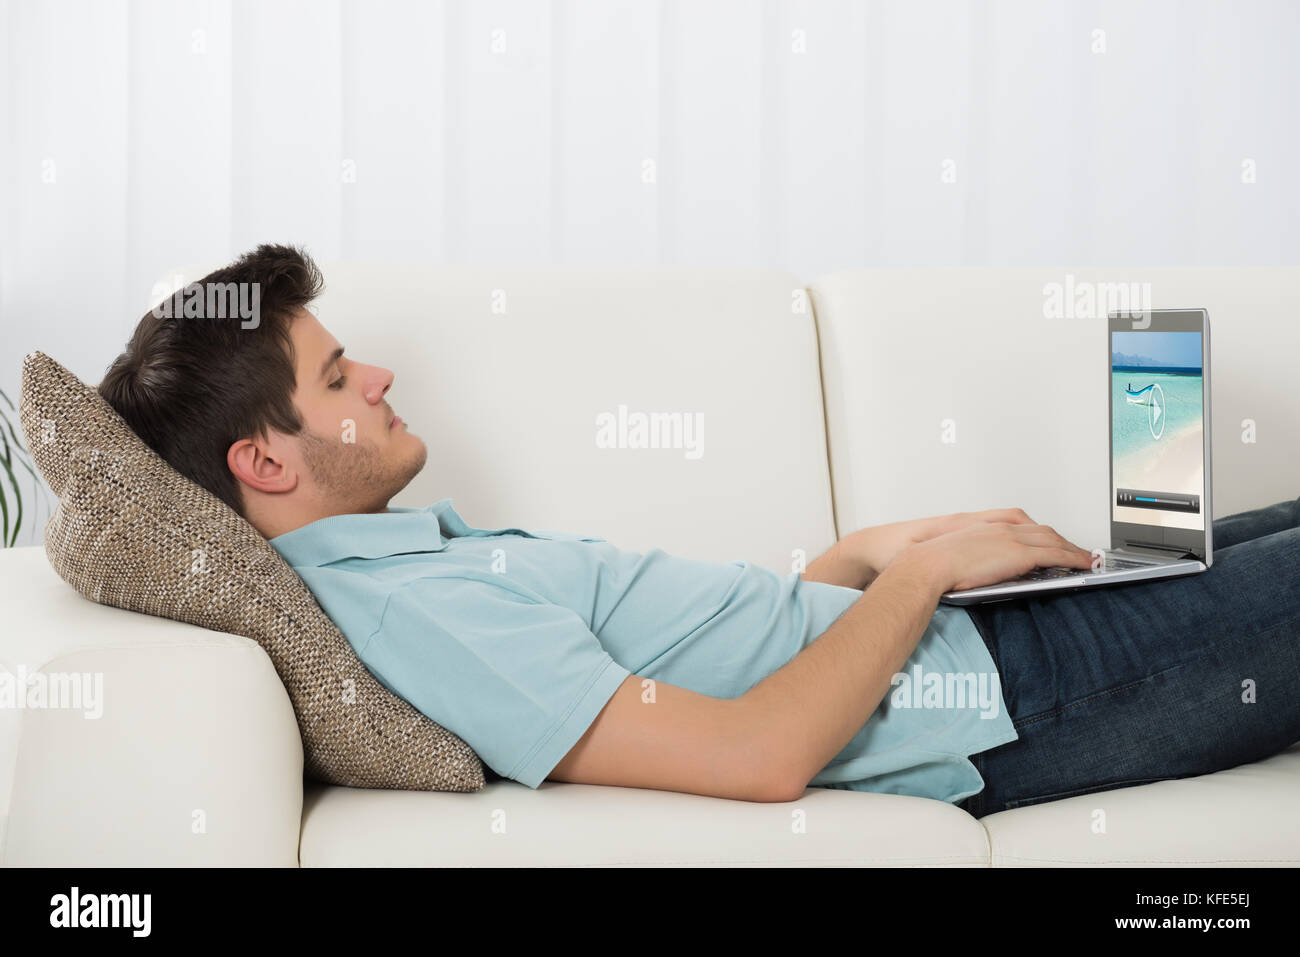 Young Man Lying On Sofa Watching Video On Laptop Stock Photo